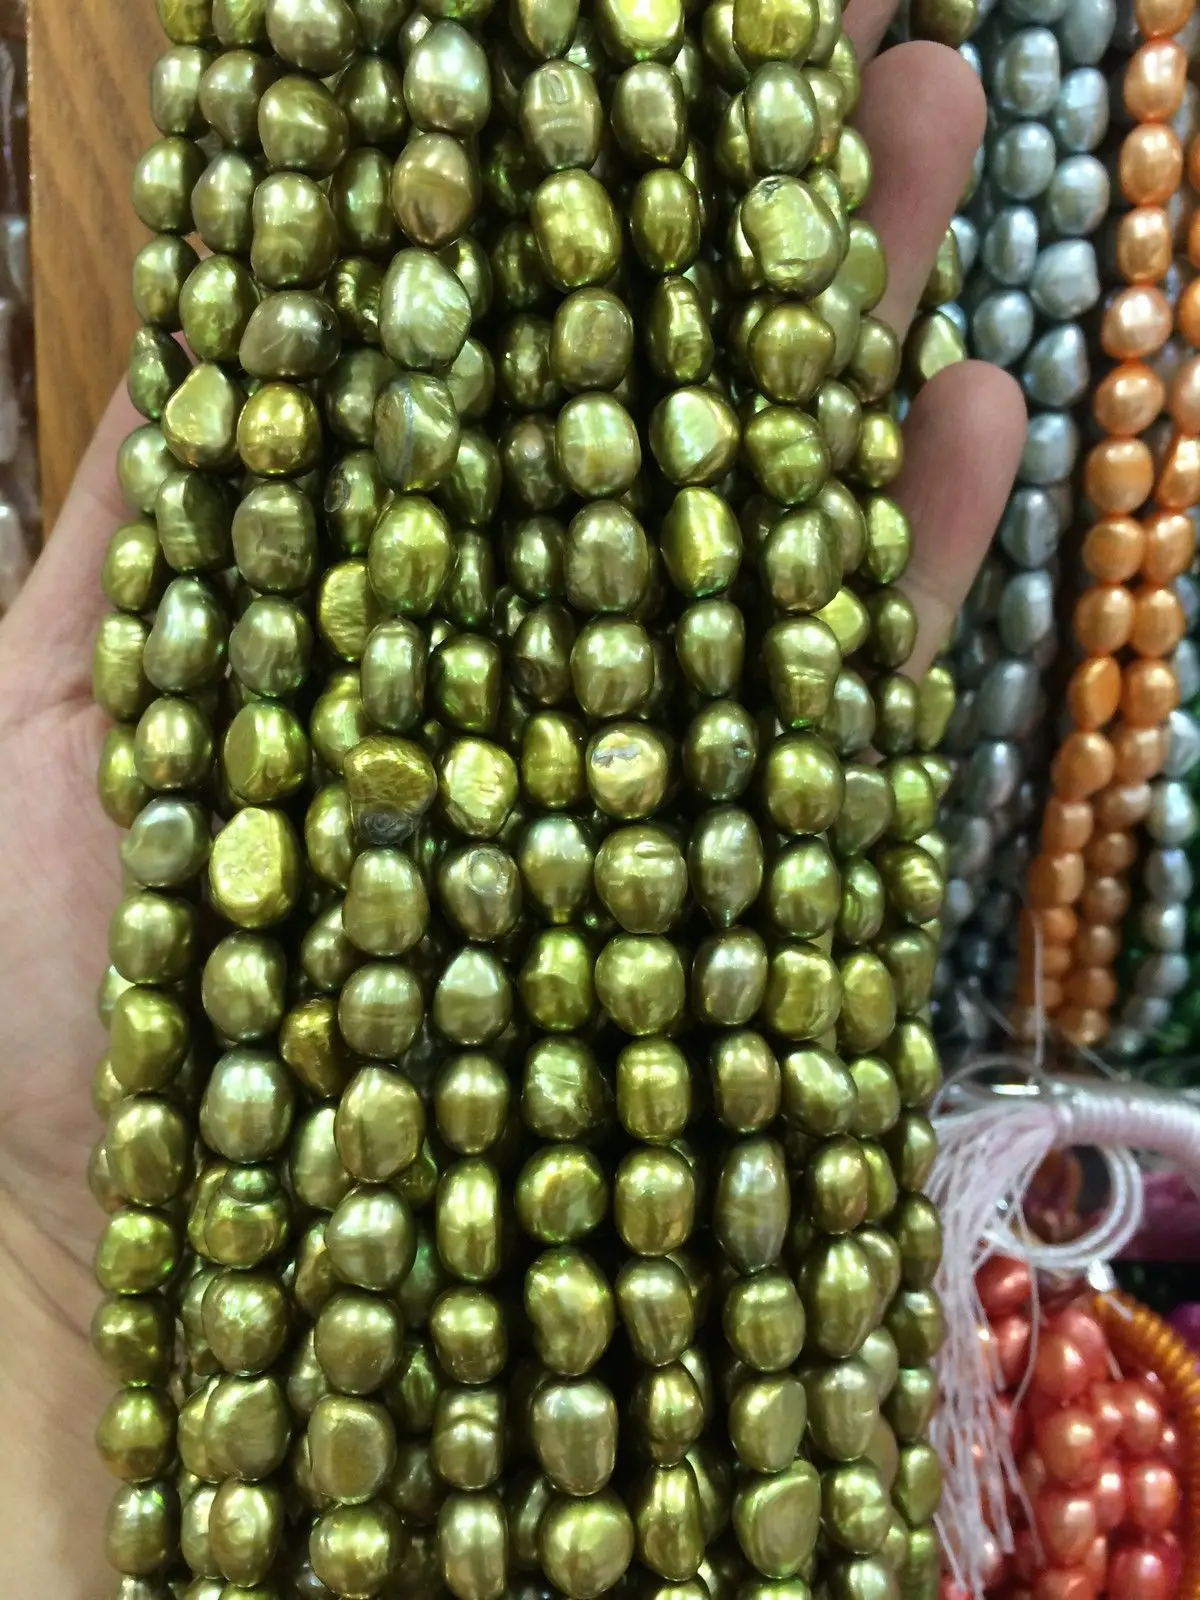 

HABITOO Wholesale Natural 8-9MM Army Green Baroque Irregular Freshwater Pearl Loose Beads DIY for Jewelry Making Necklace